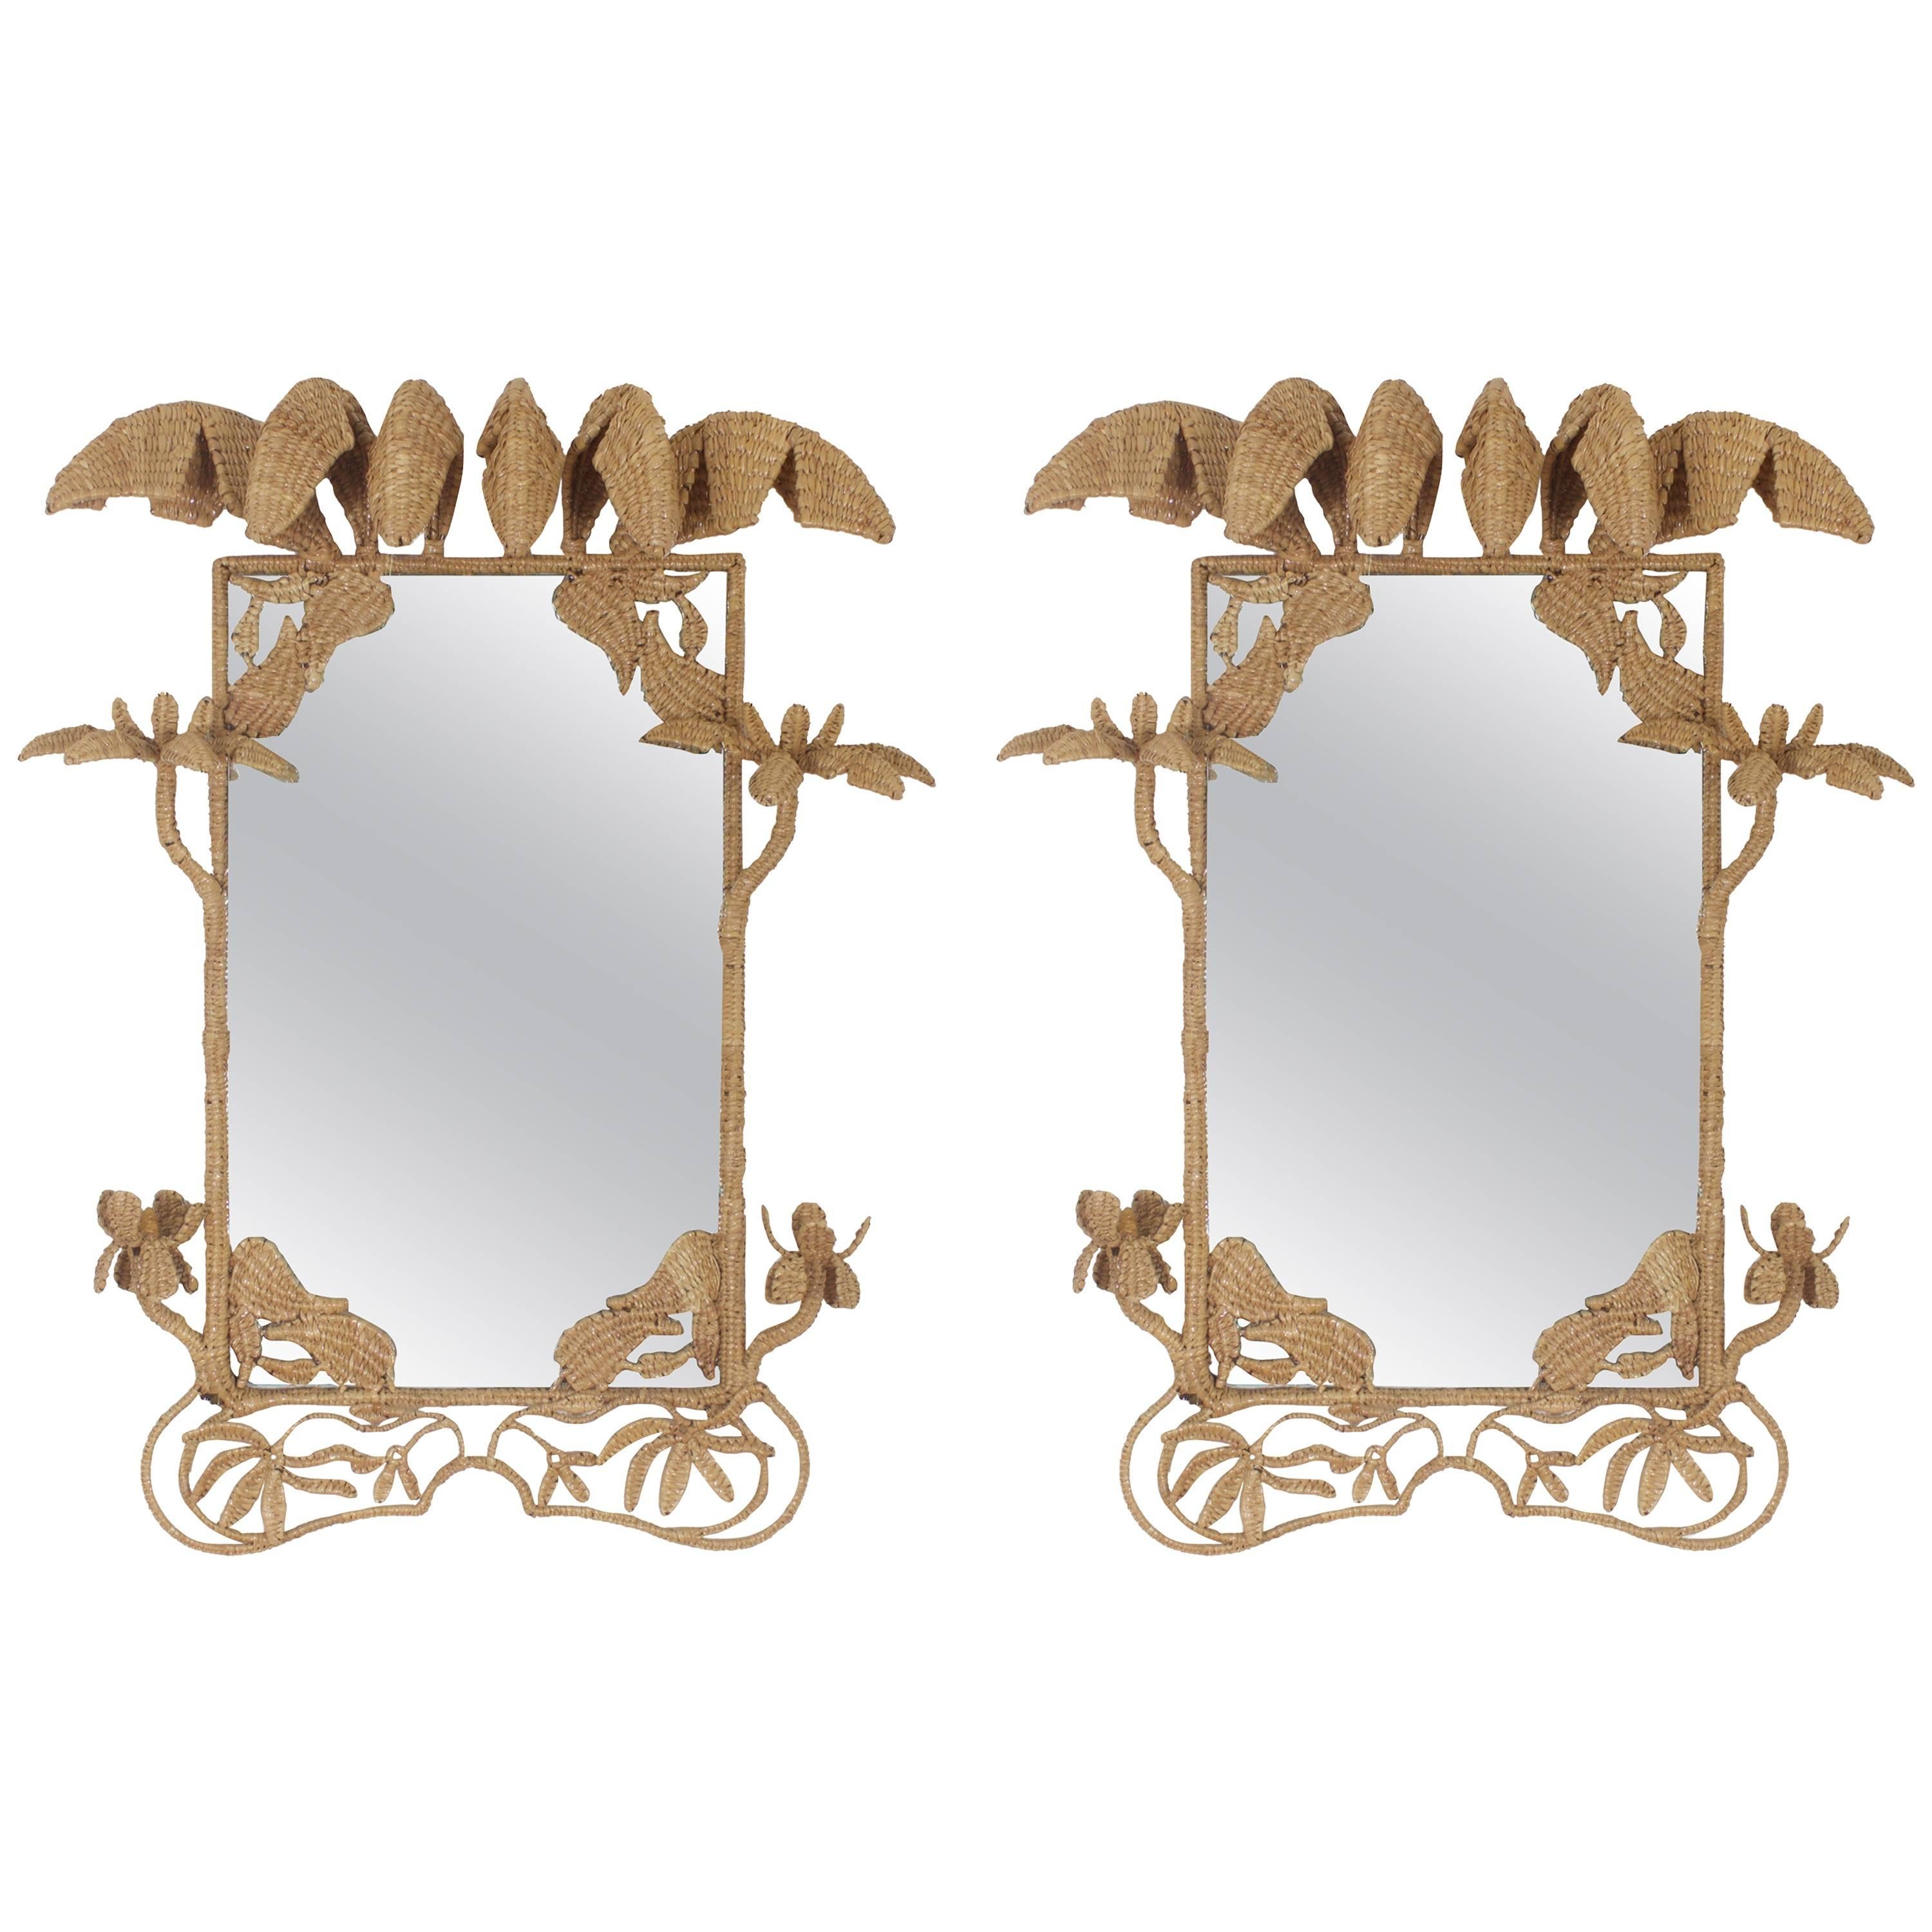 Pair of Mario Torres Mirrors with a Tropical Palm Motif